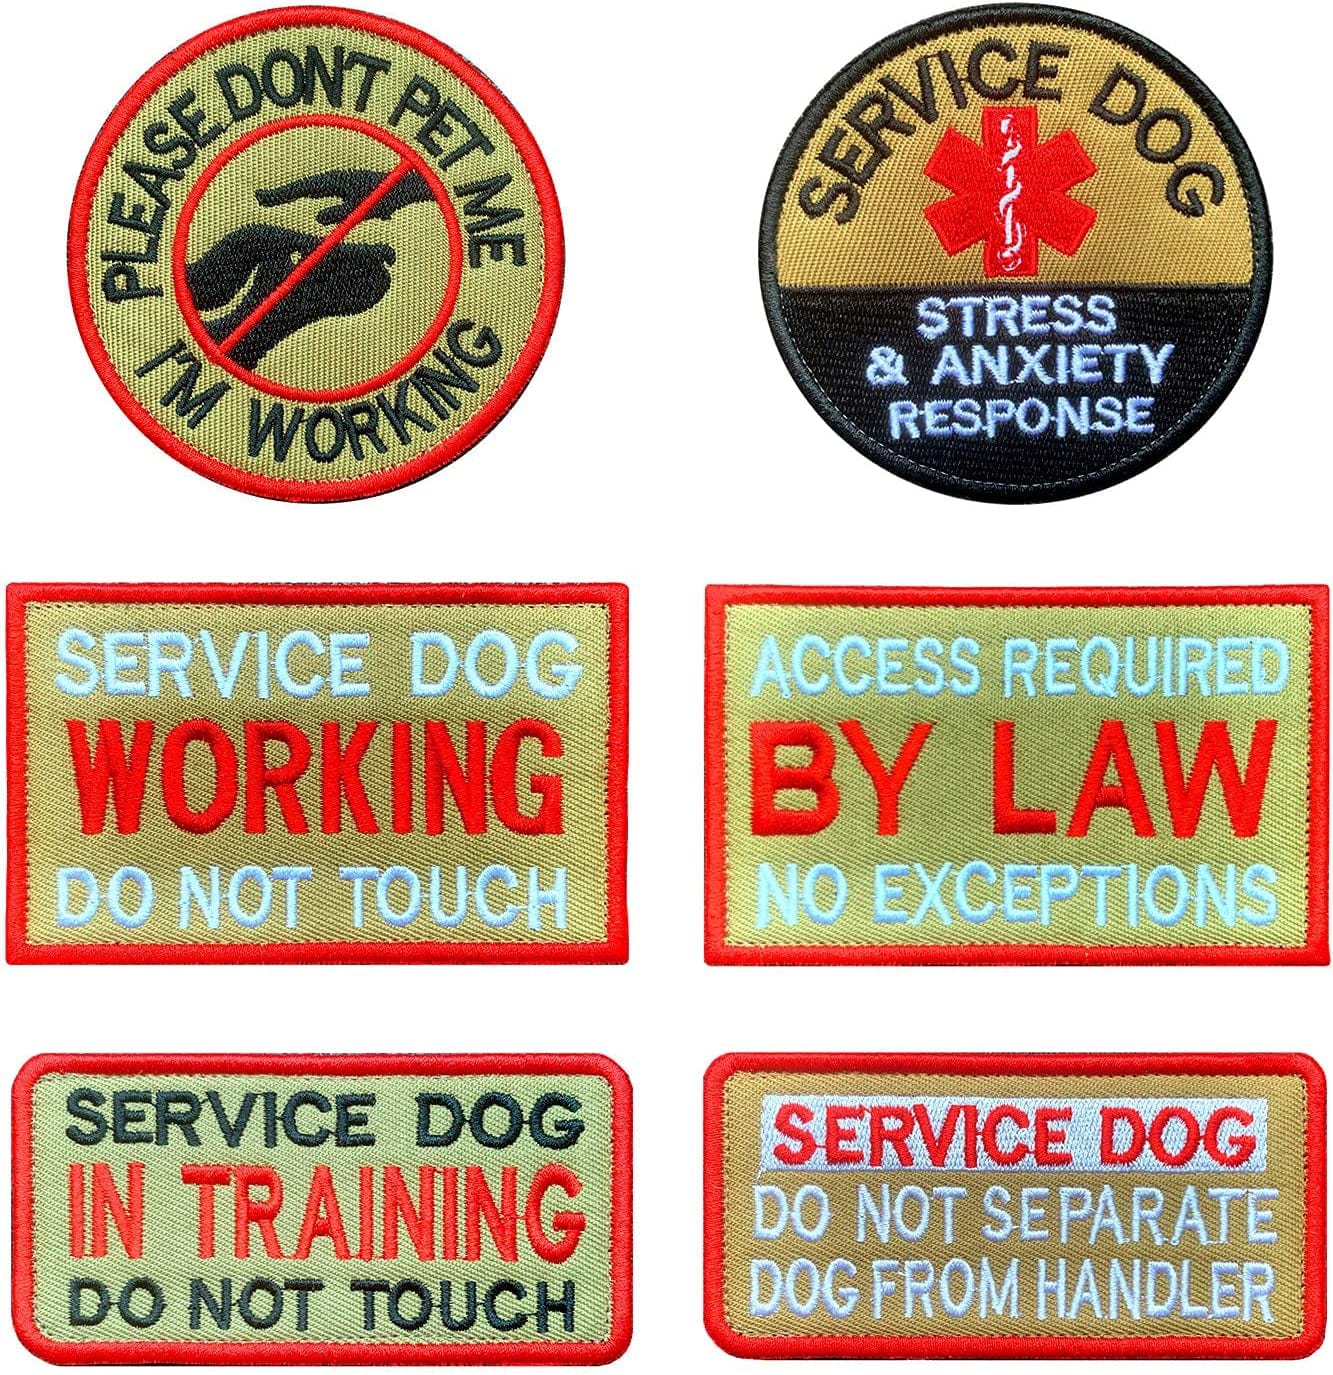 Antrix 6 Pcs Service Dog in Training Working Do Not Touch Pet Stress & Anxiety Response Access Required by Law Hook & Loop Service Dog Patch for Medium and Large Dogs Vests/Harness -Red Animals & Pet Supplies > Pet Supplies > Dog Supplies > Dog Apparel Antrix Brown  